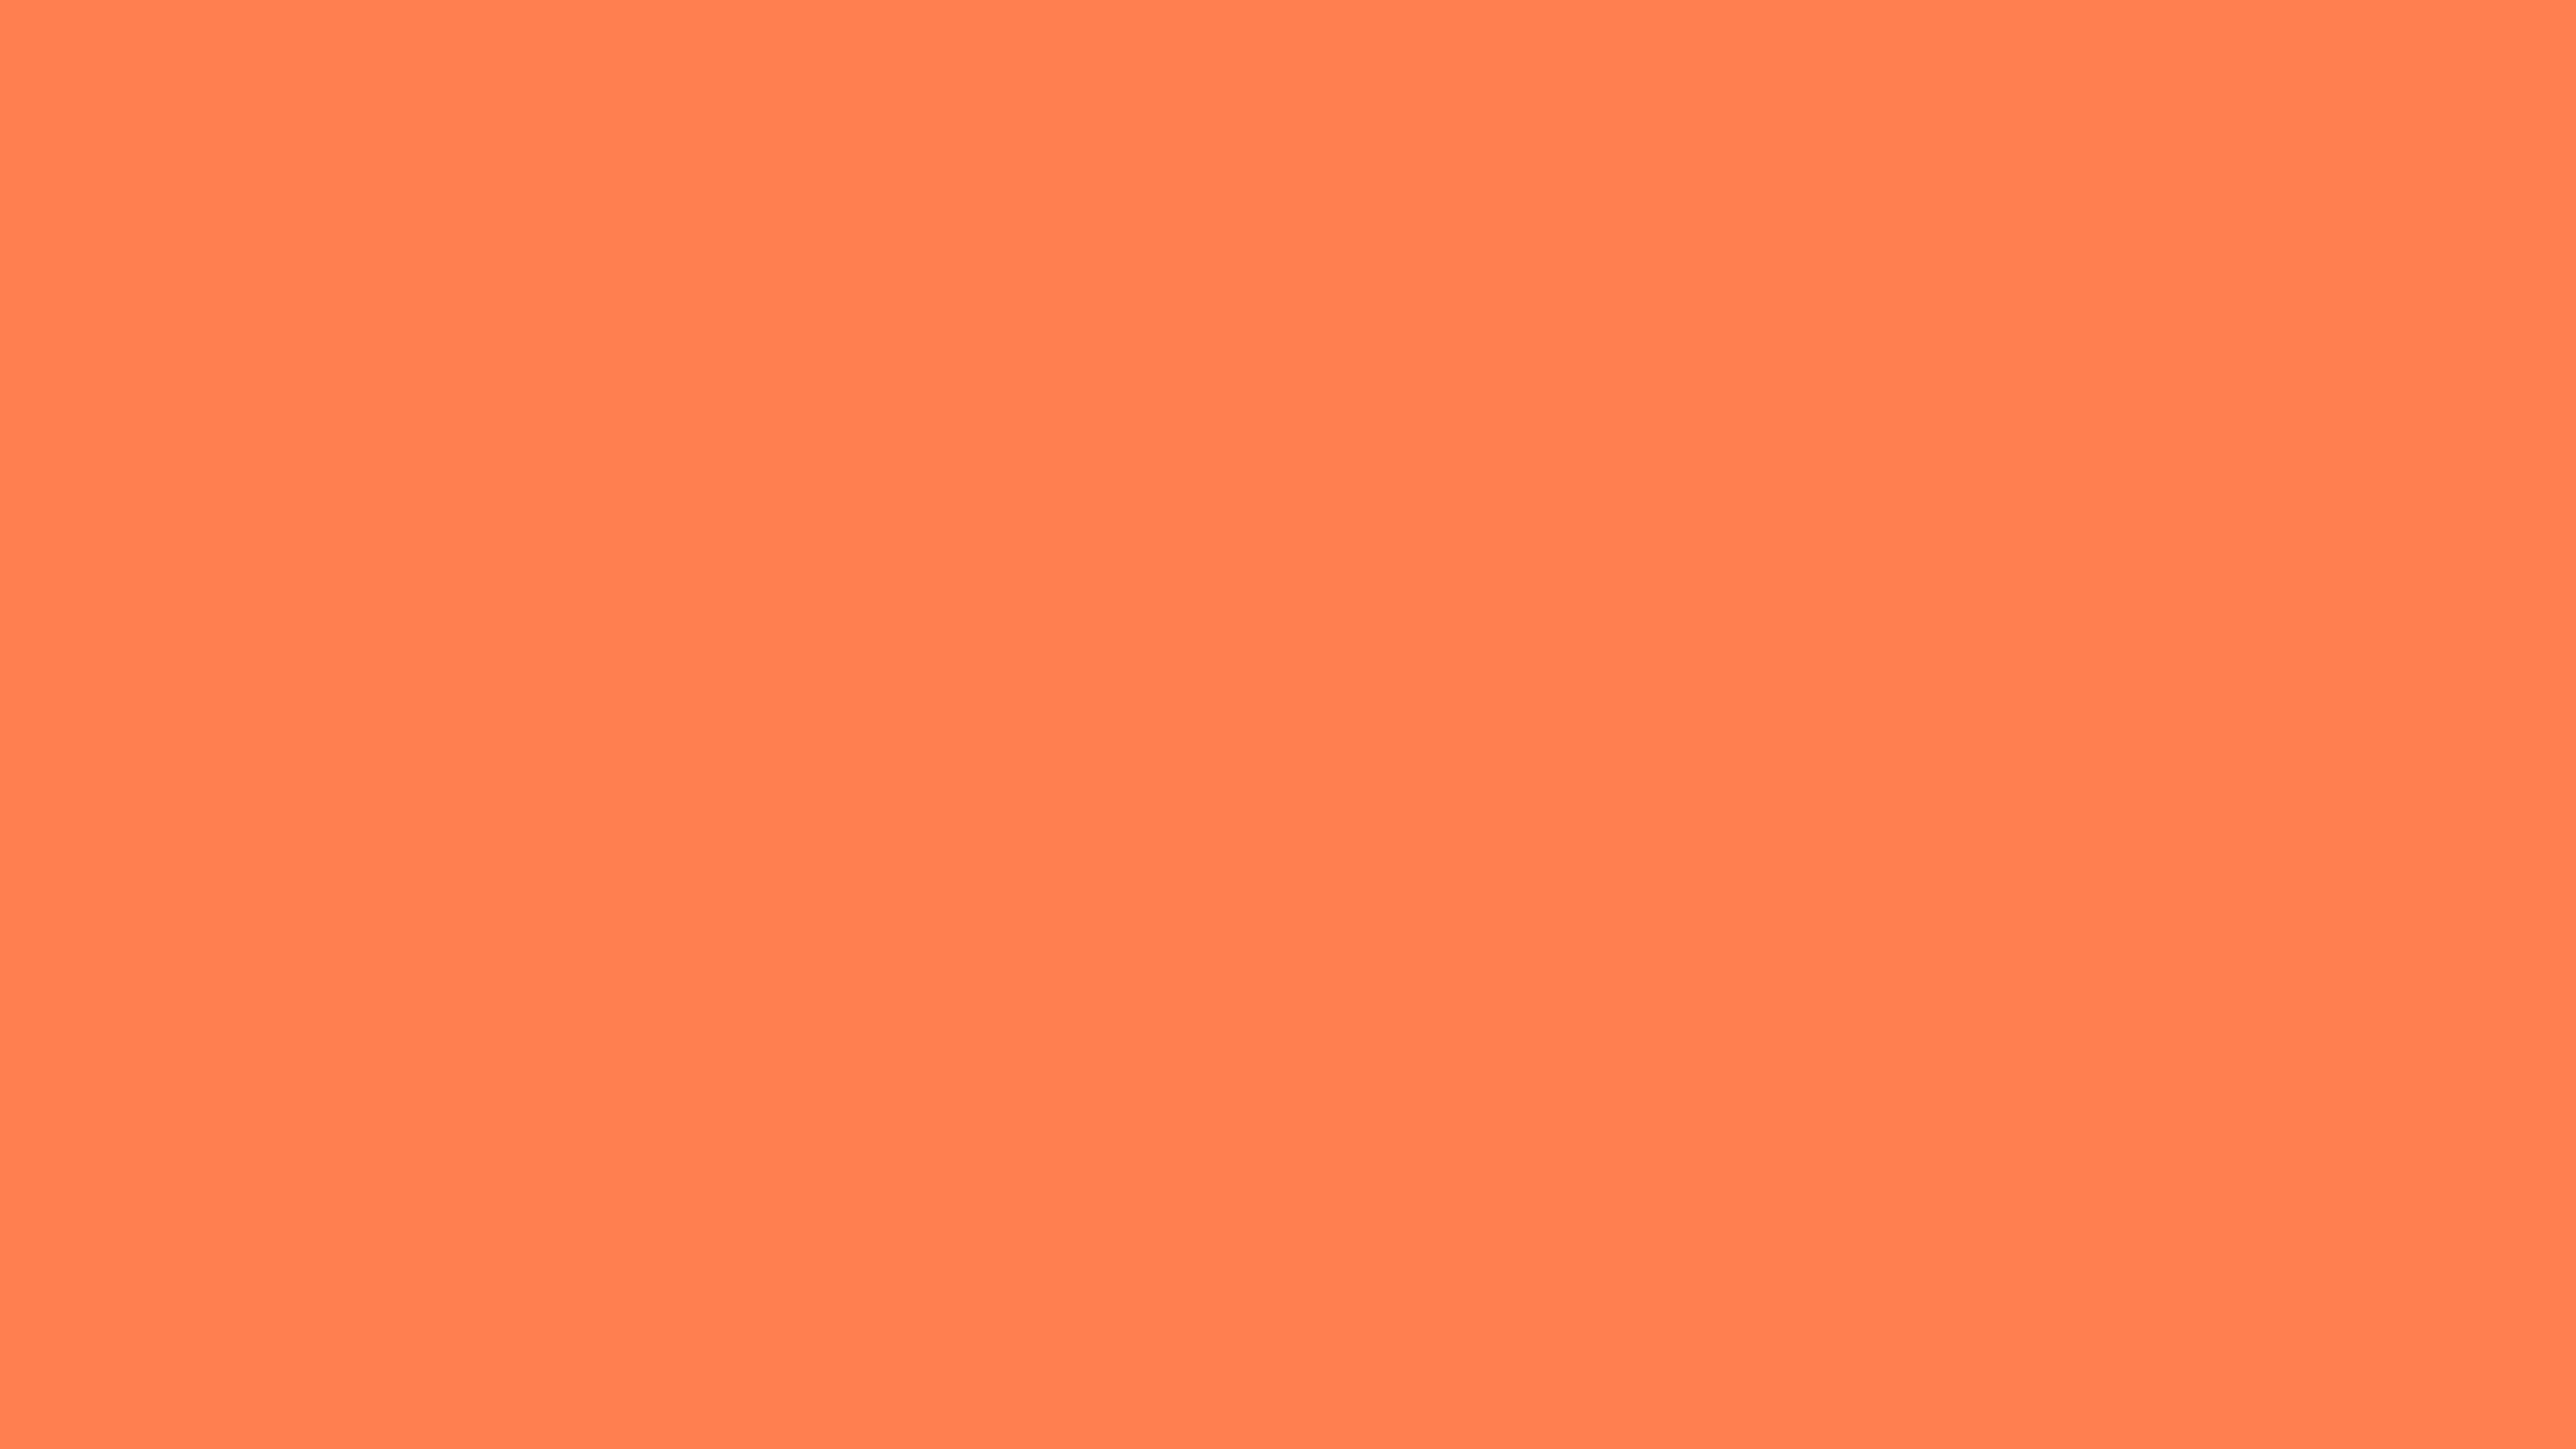 4096x2304 Coral Solid Color Background